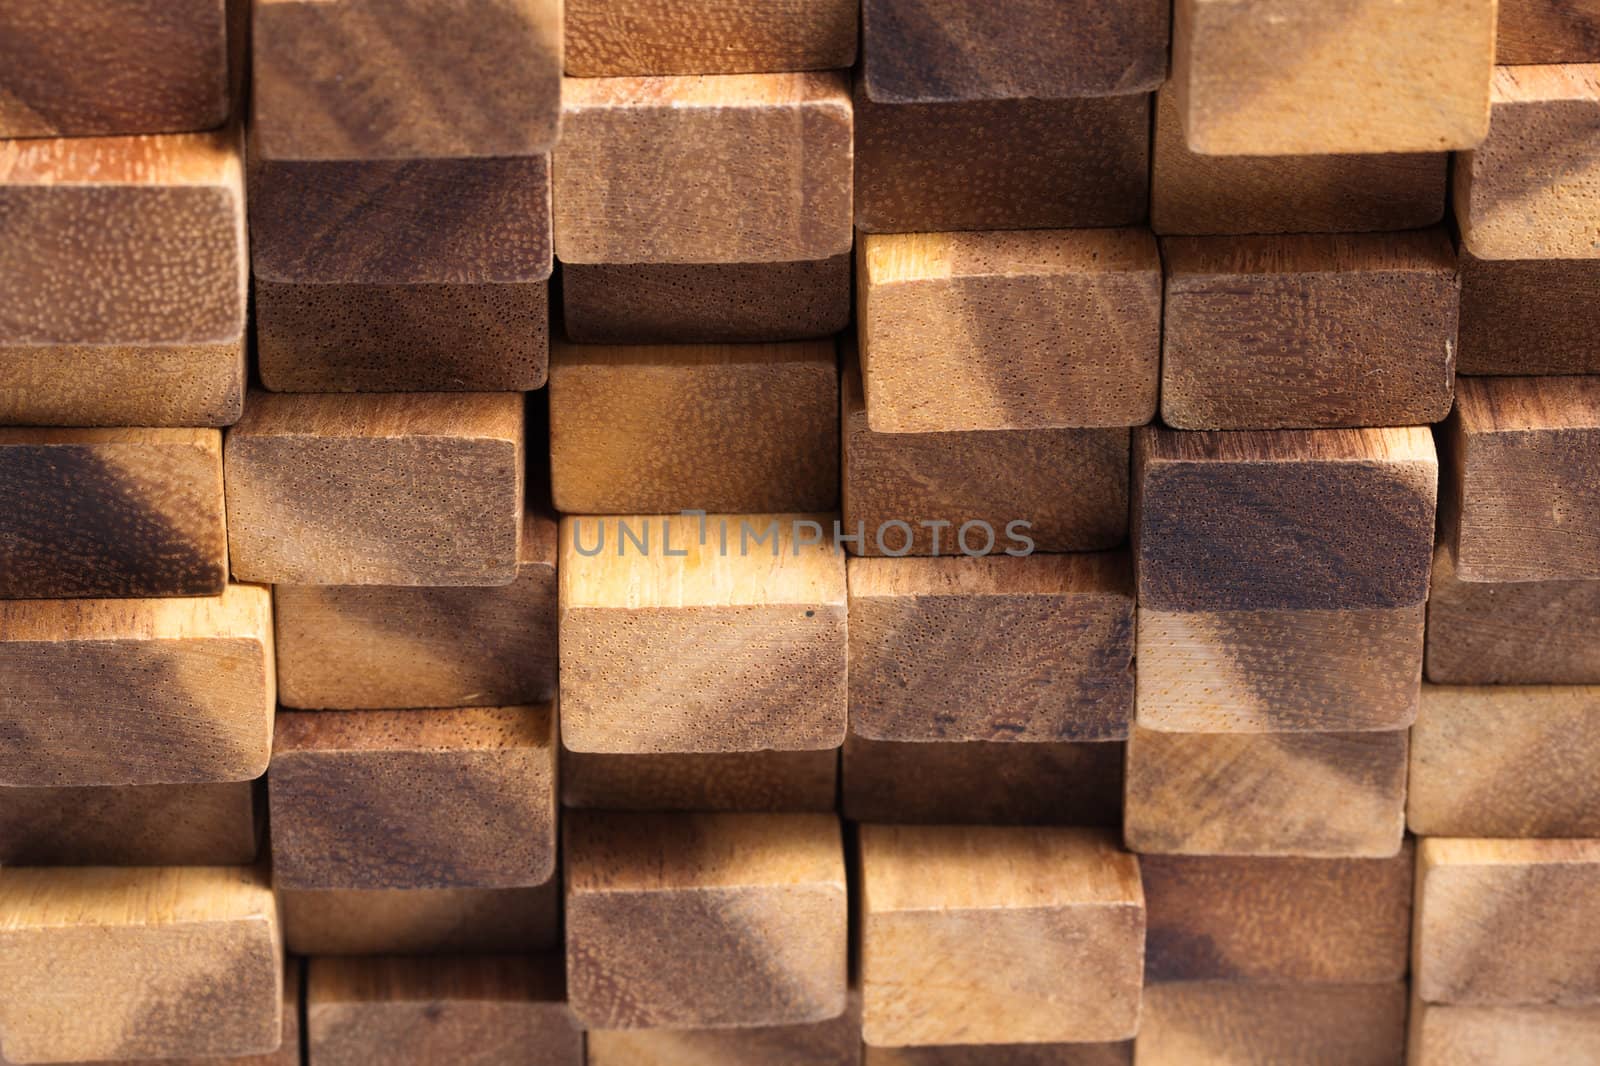 Stack of wood by Suriyaphoto